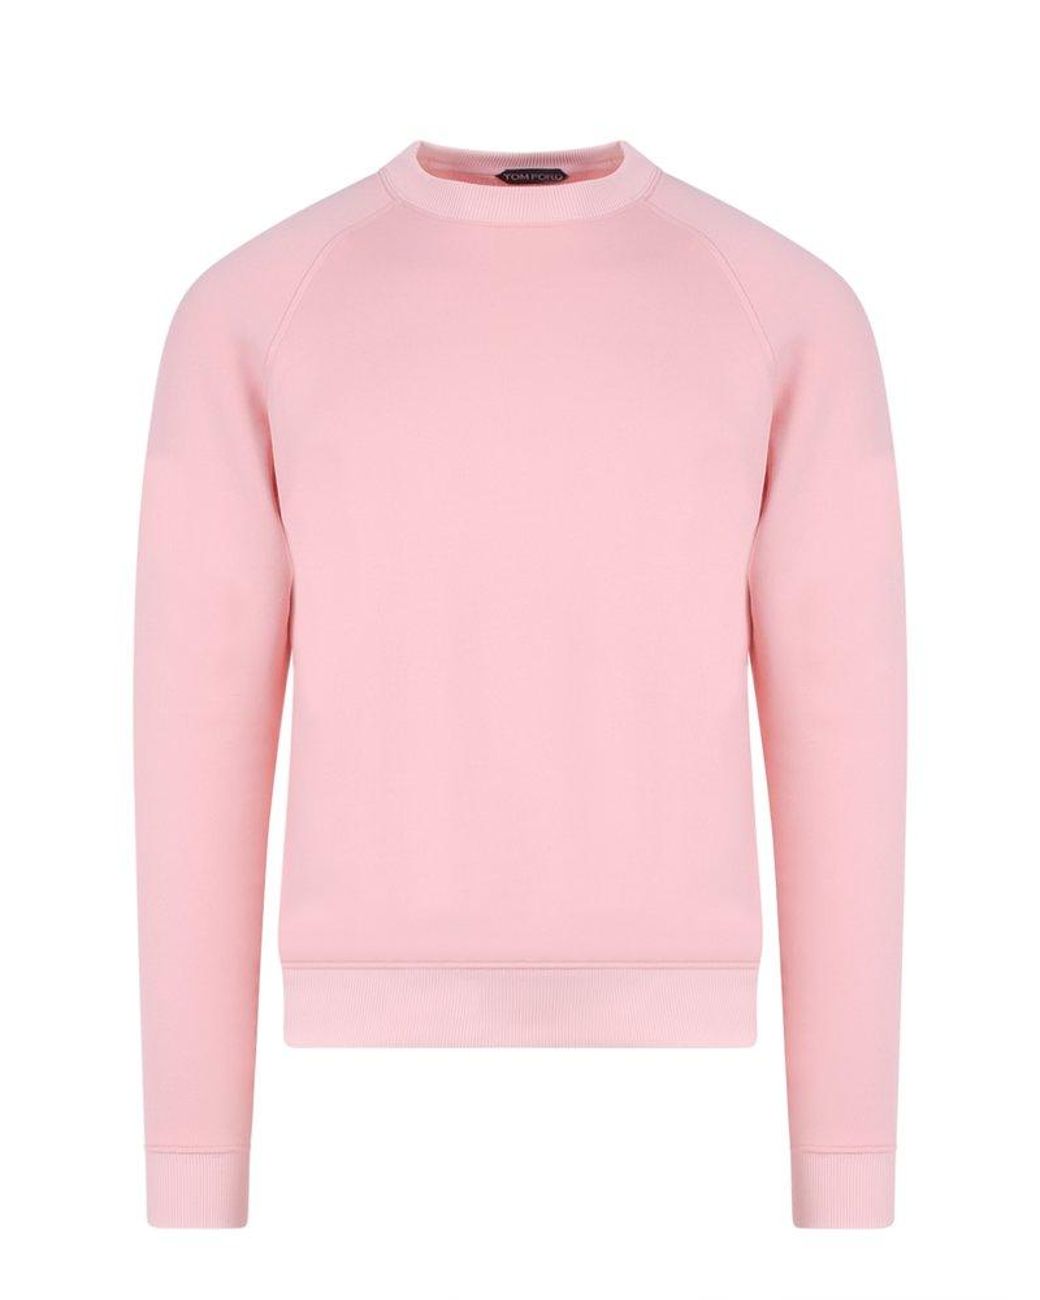 Tom Ford Cotton Sweatshirt in Pink for Men | Lyst